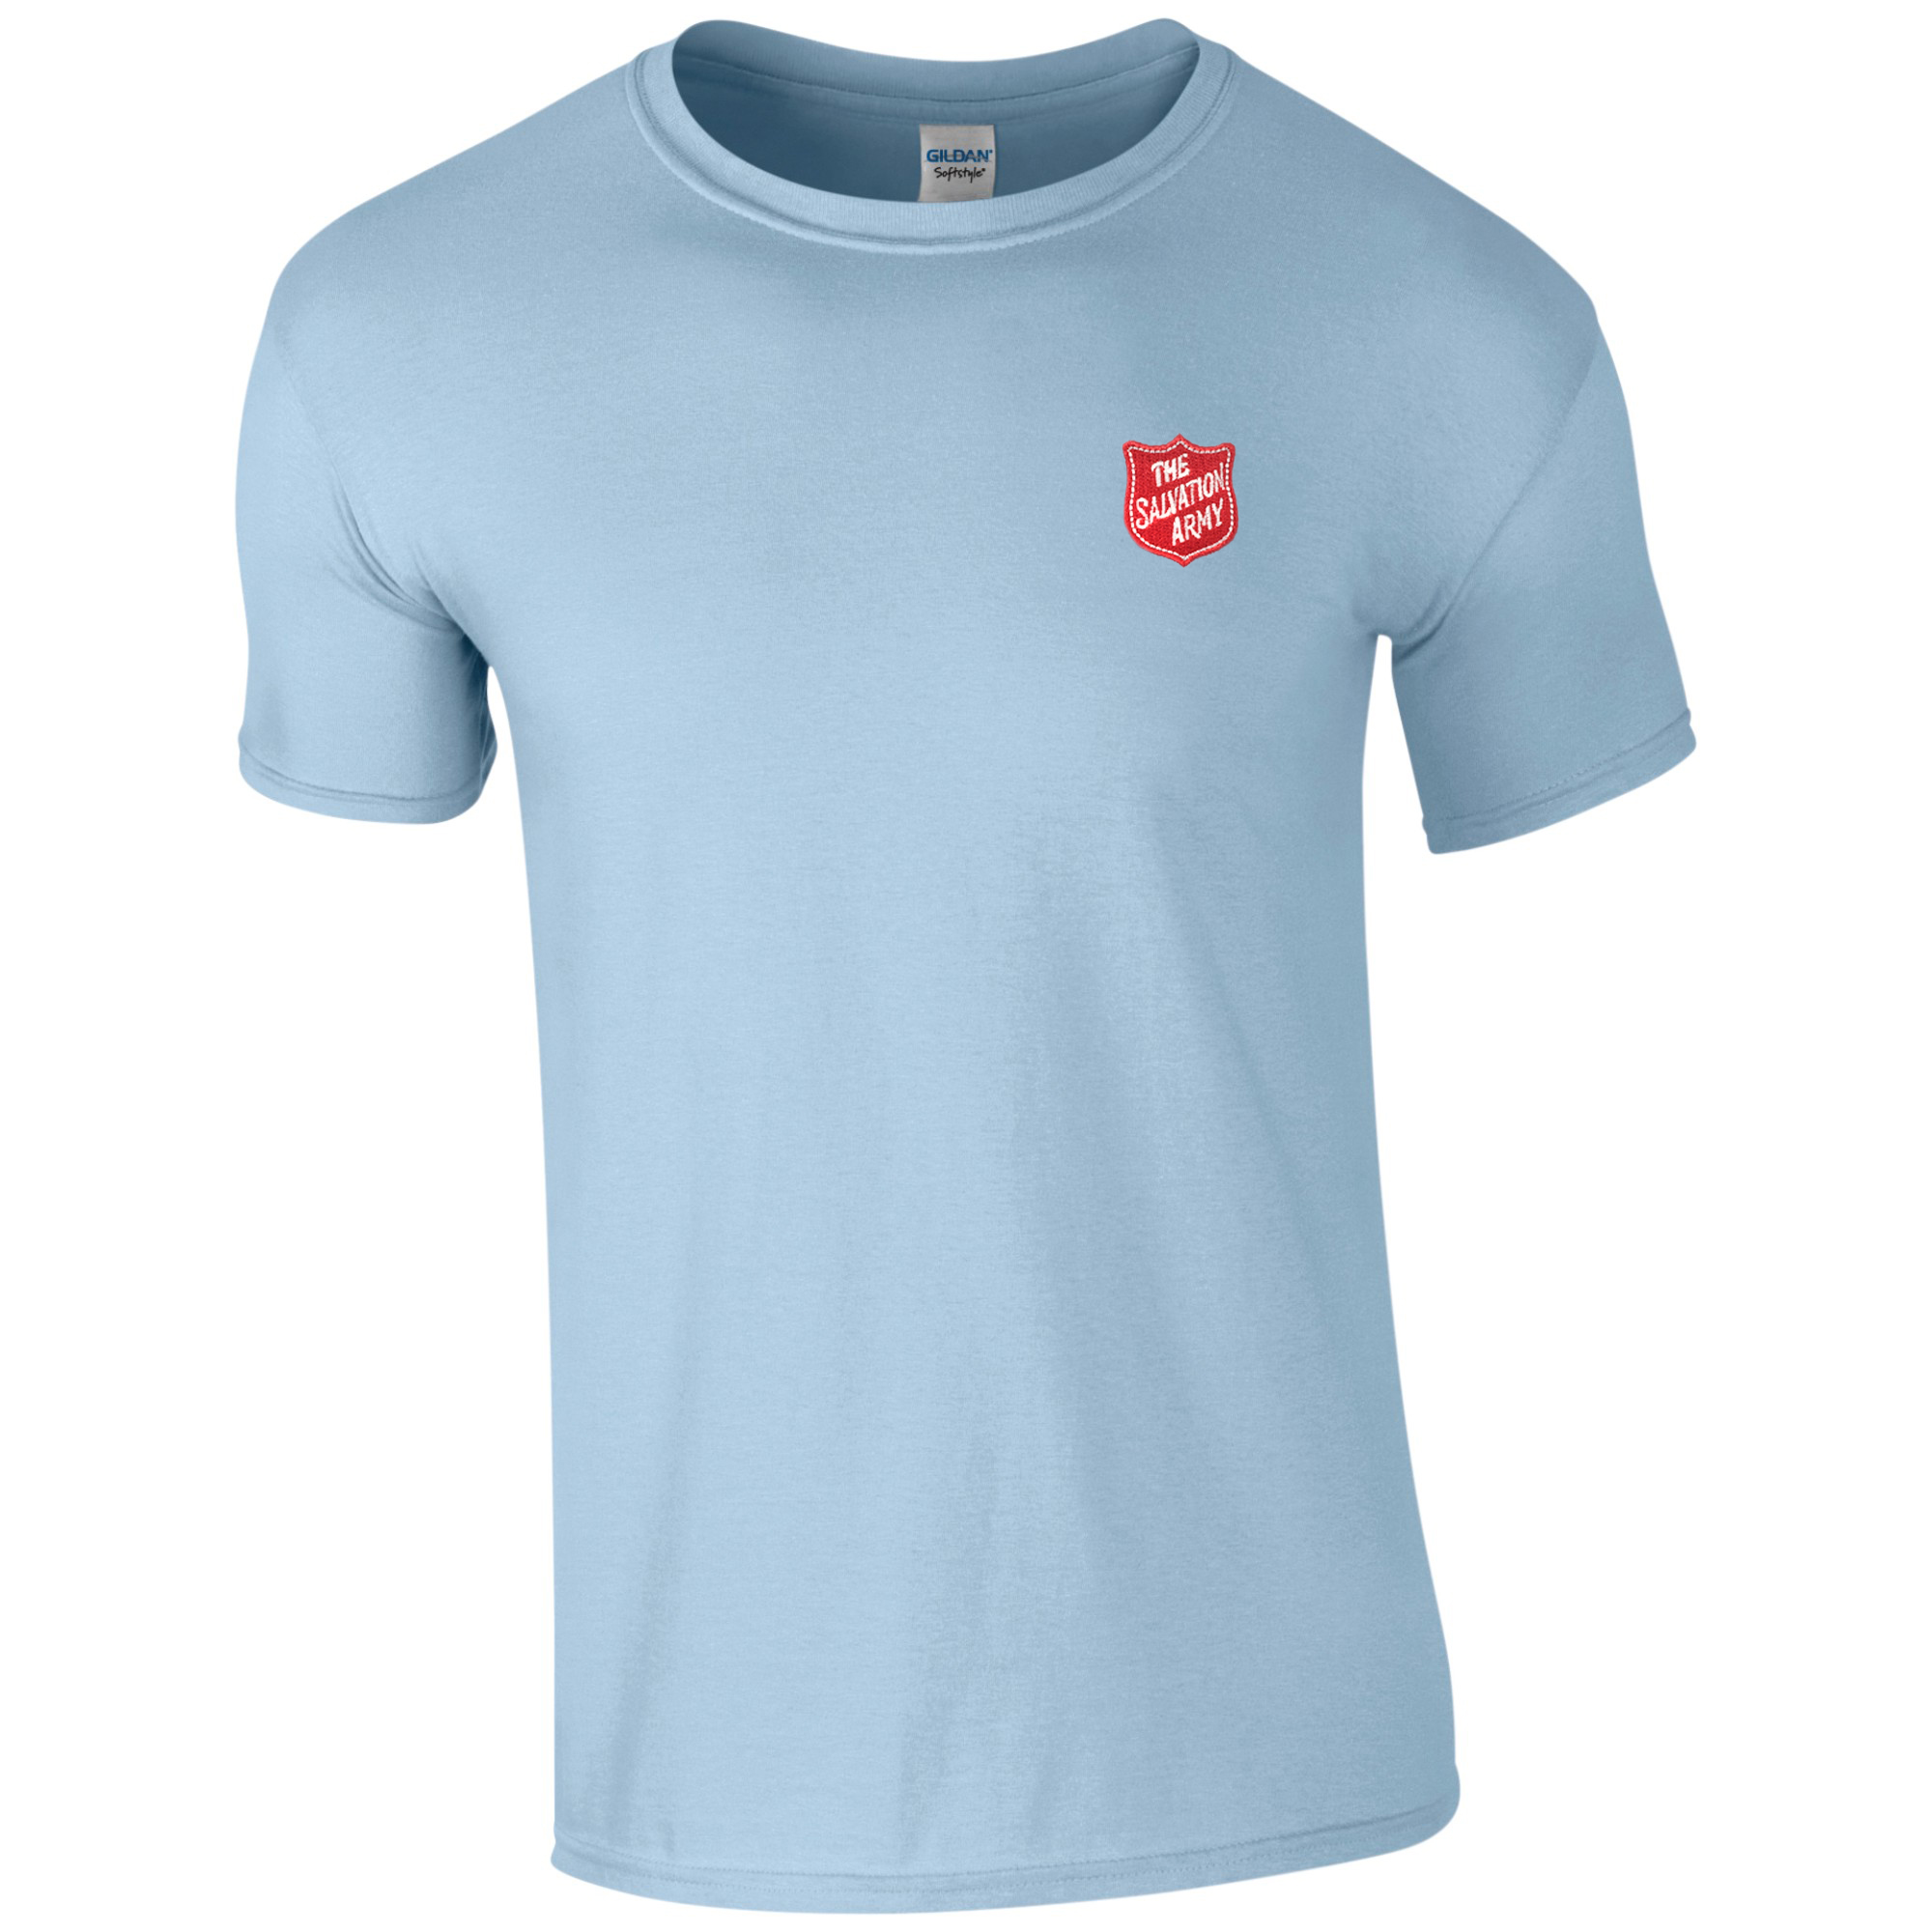 Essentials T Shirt - Blue with Shield